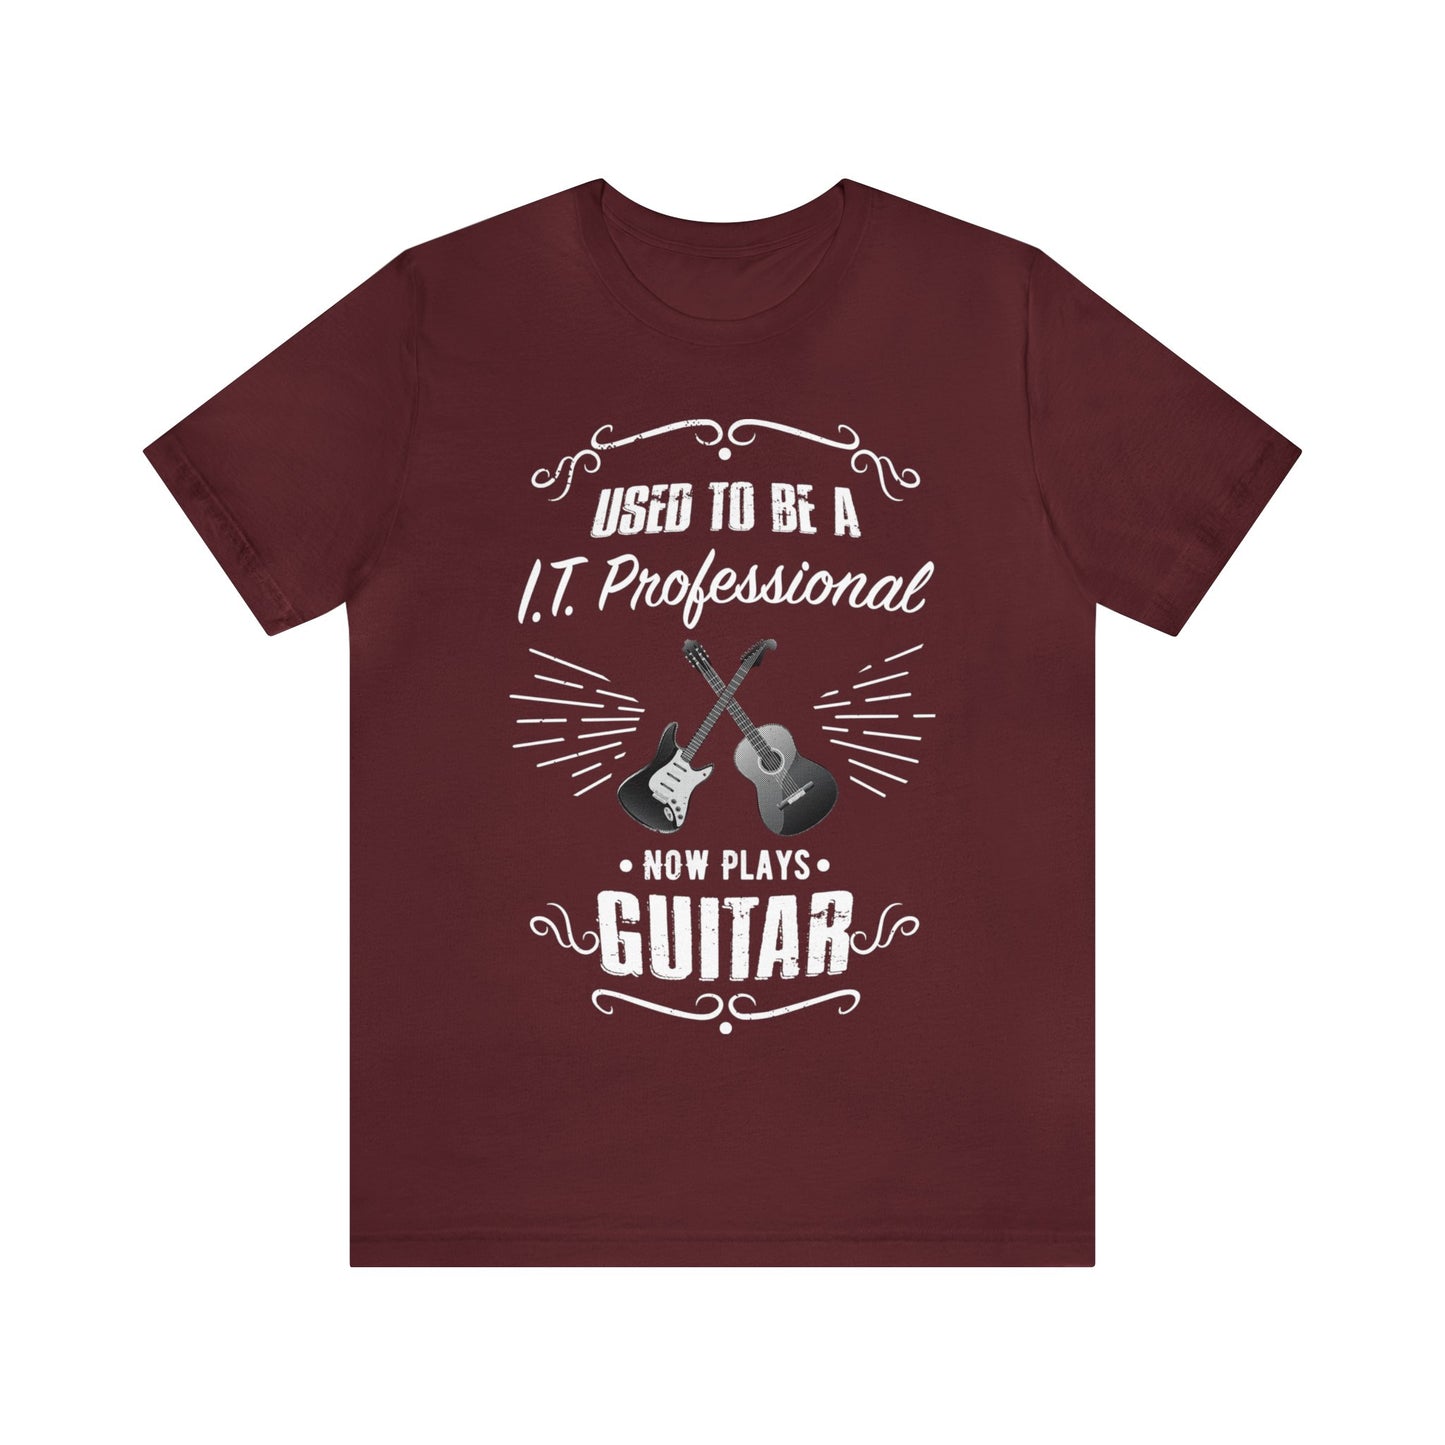 Used to be a I.T. PROFESSIONAL; Now Plays GUITAR - Funny Retirement Gift, Unisex T-shirt Bella+Canvas 3001, dark colors for amateur musician/guitar player